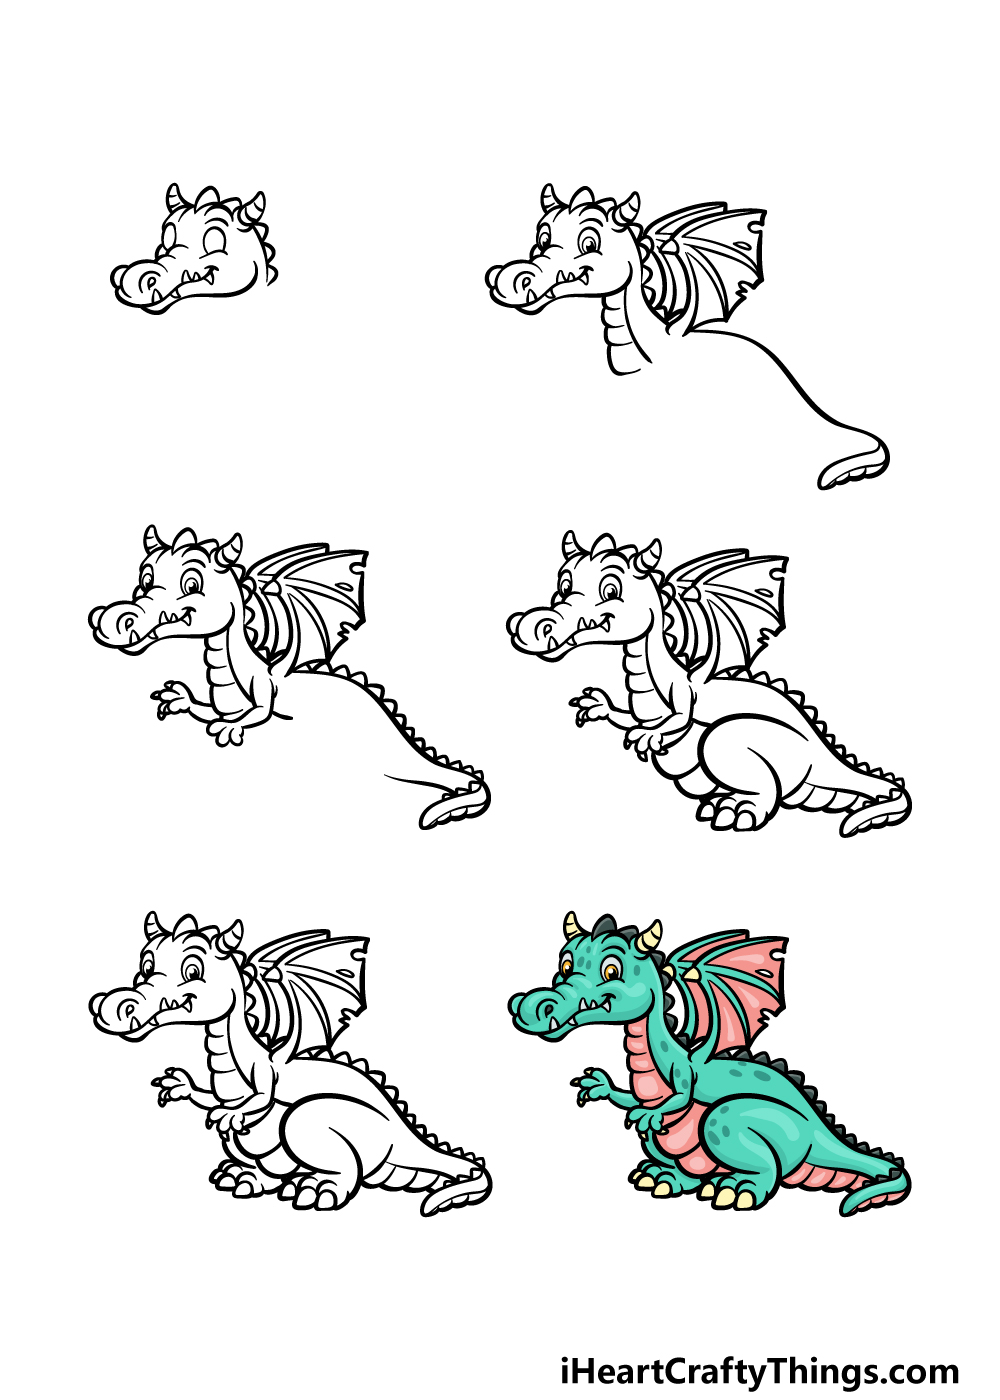 how to draw a cartoon dragon in 6 steps